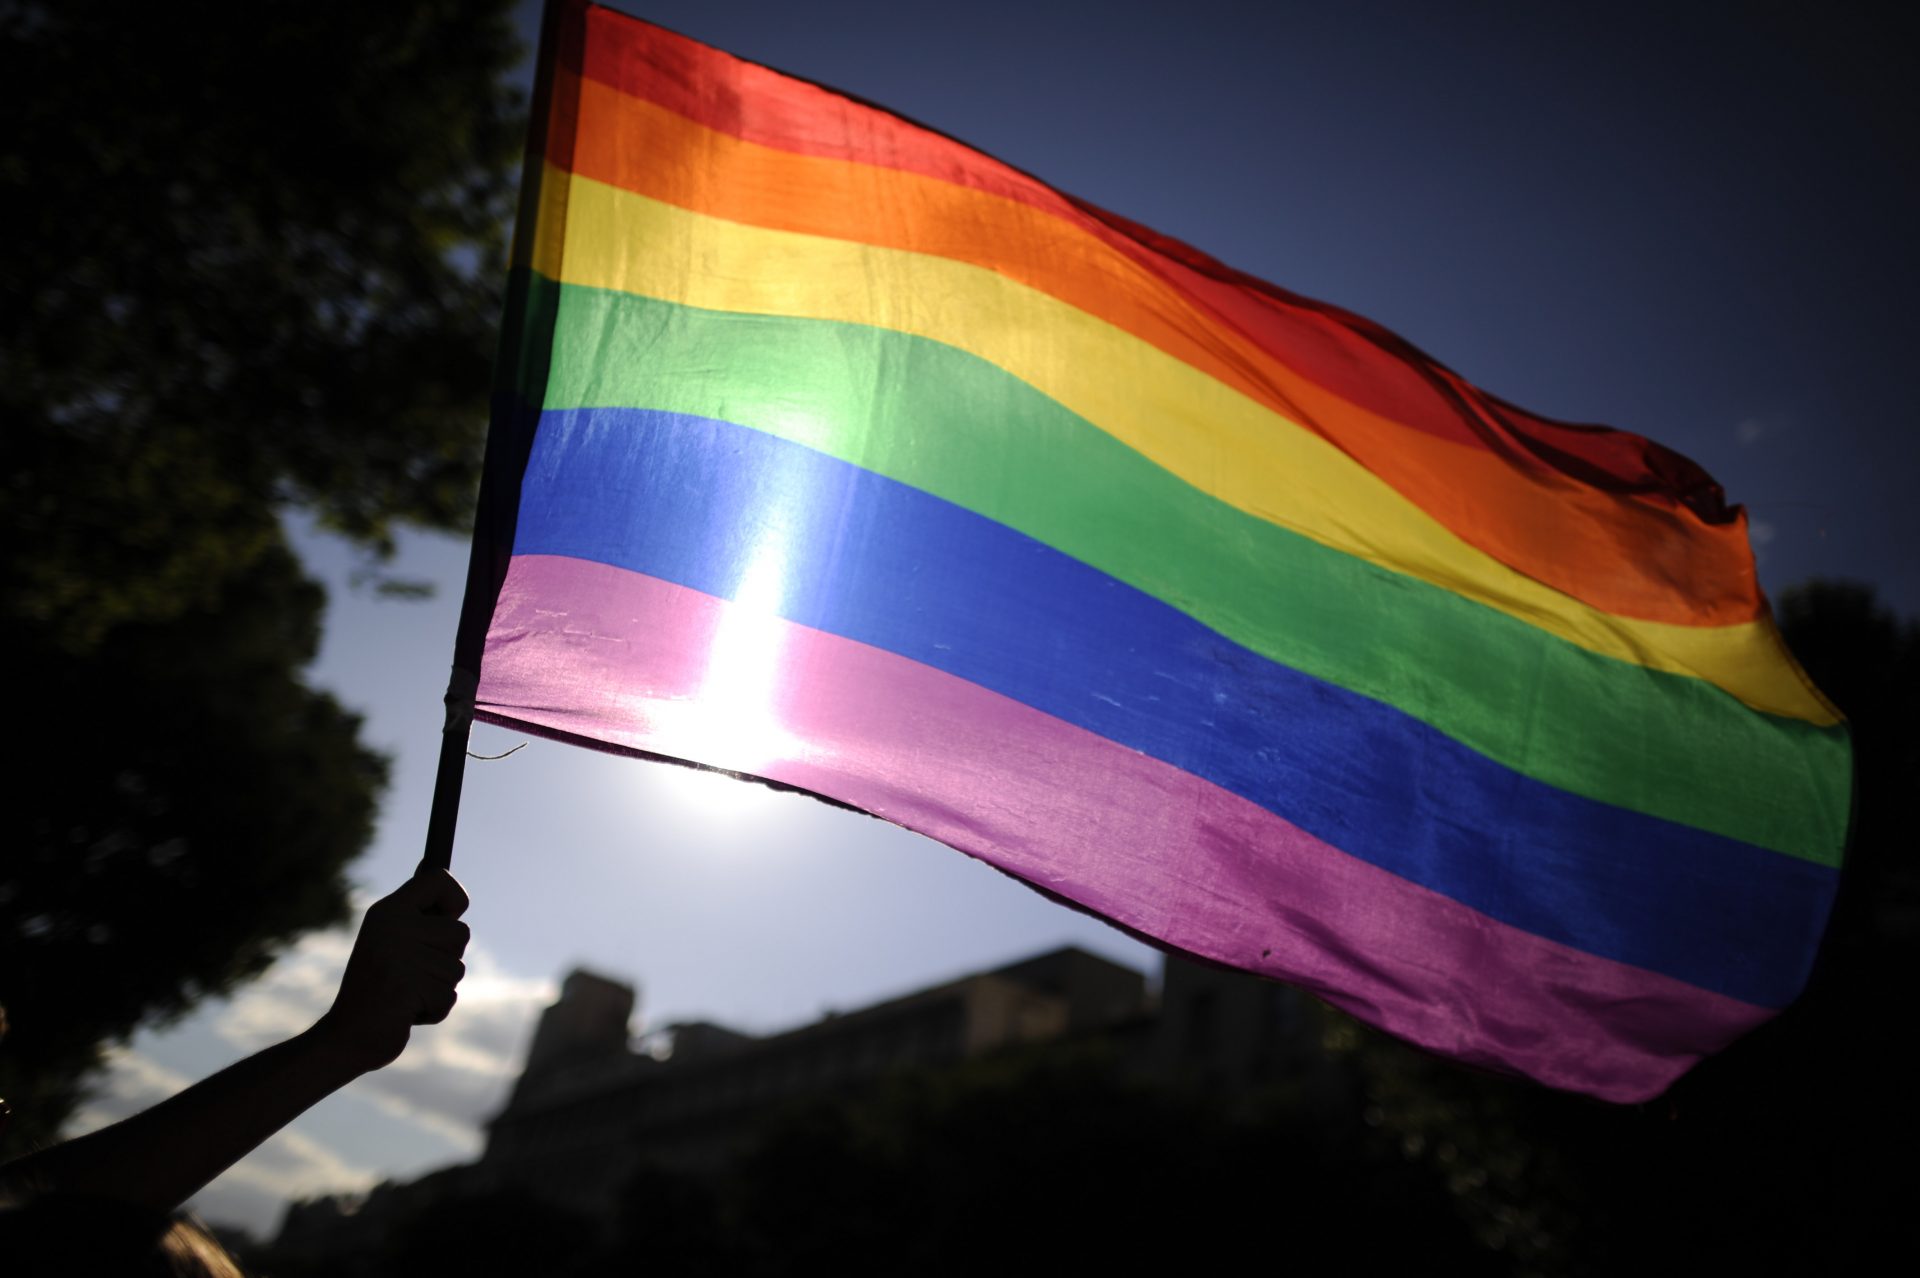 File photo of a person waving a rainbow flag. (Photo by PEDRO ARMESTRE/AFP/GettyImages)